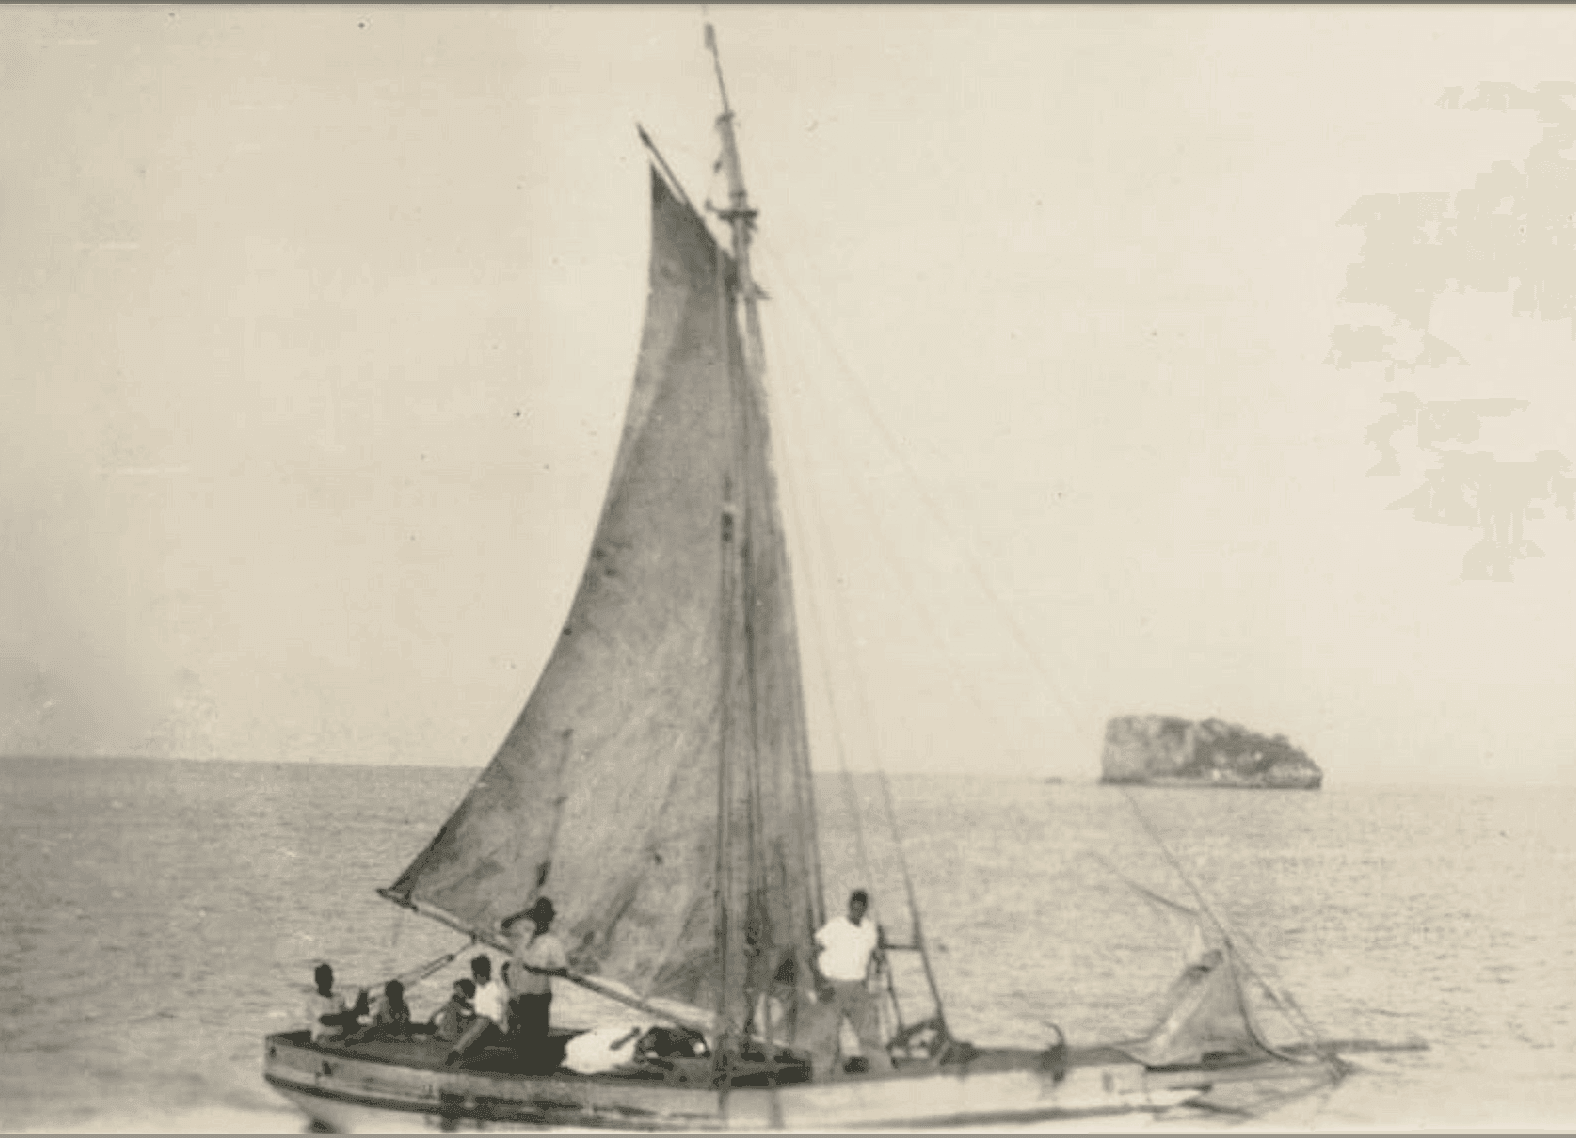 The Loss of the British sloop, KITE from Tortola, British Virgin Islands ~ 1901 By Valerie Sims